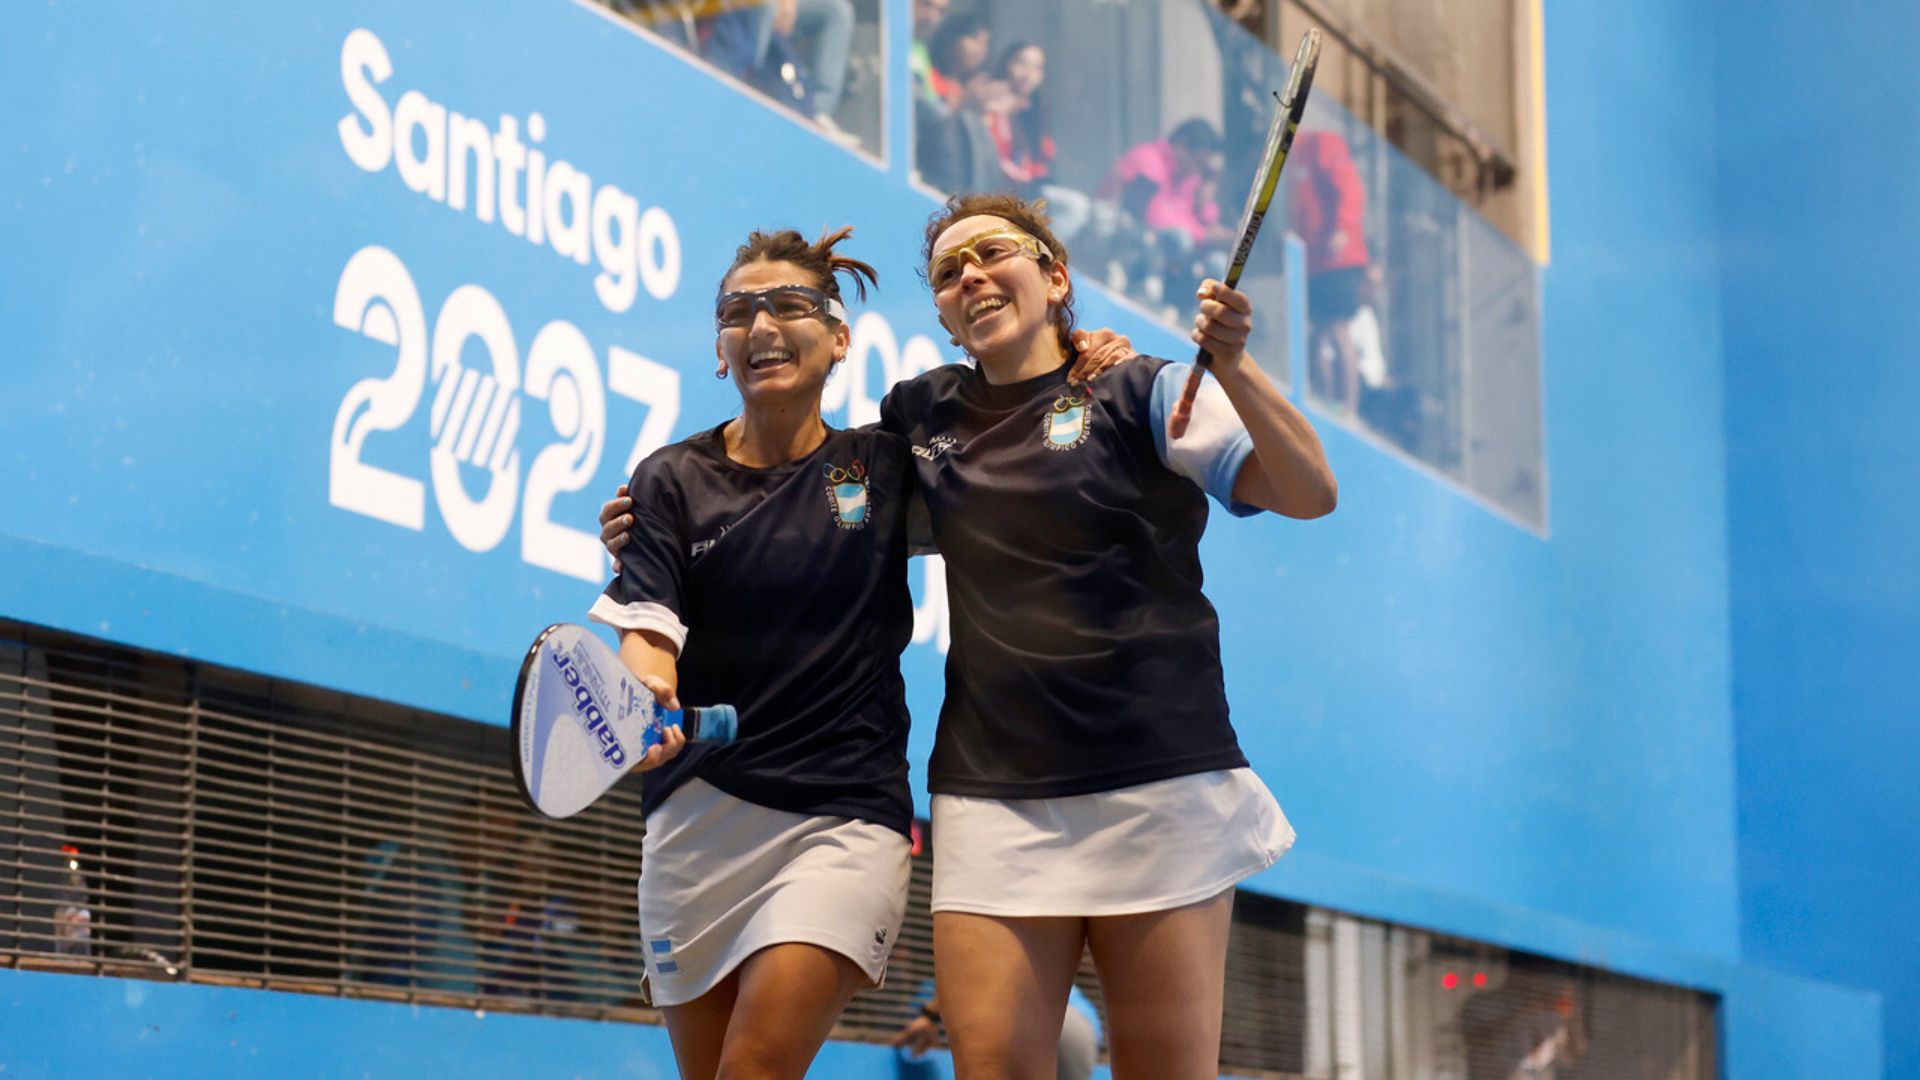 Argentina spoiled Mexico's Celebration in the Closing of the Basque Pelota